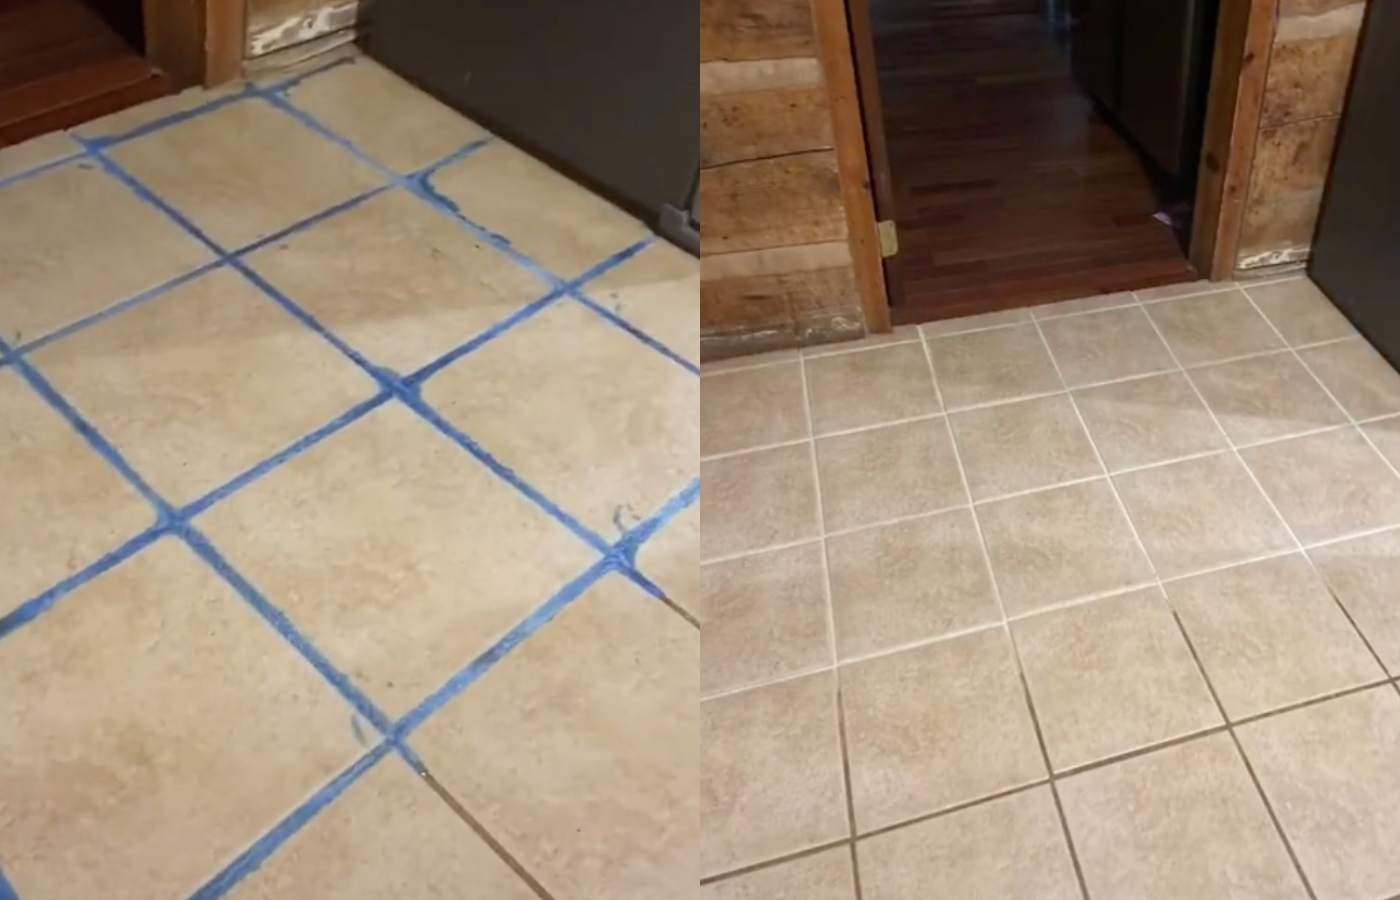 Tips For Cleaning Common Stains On Tile Using Baking Soda